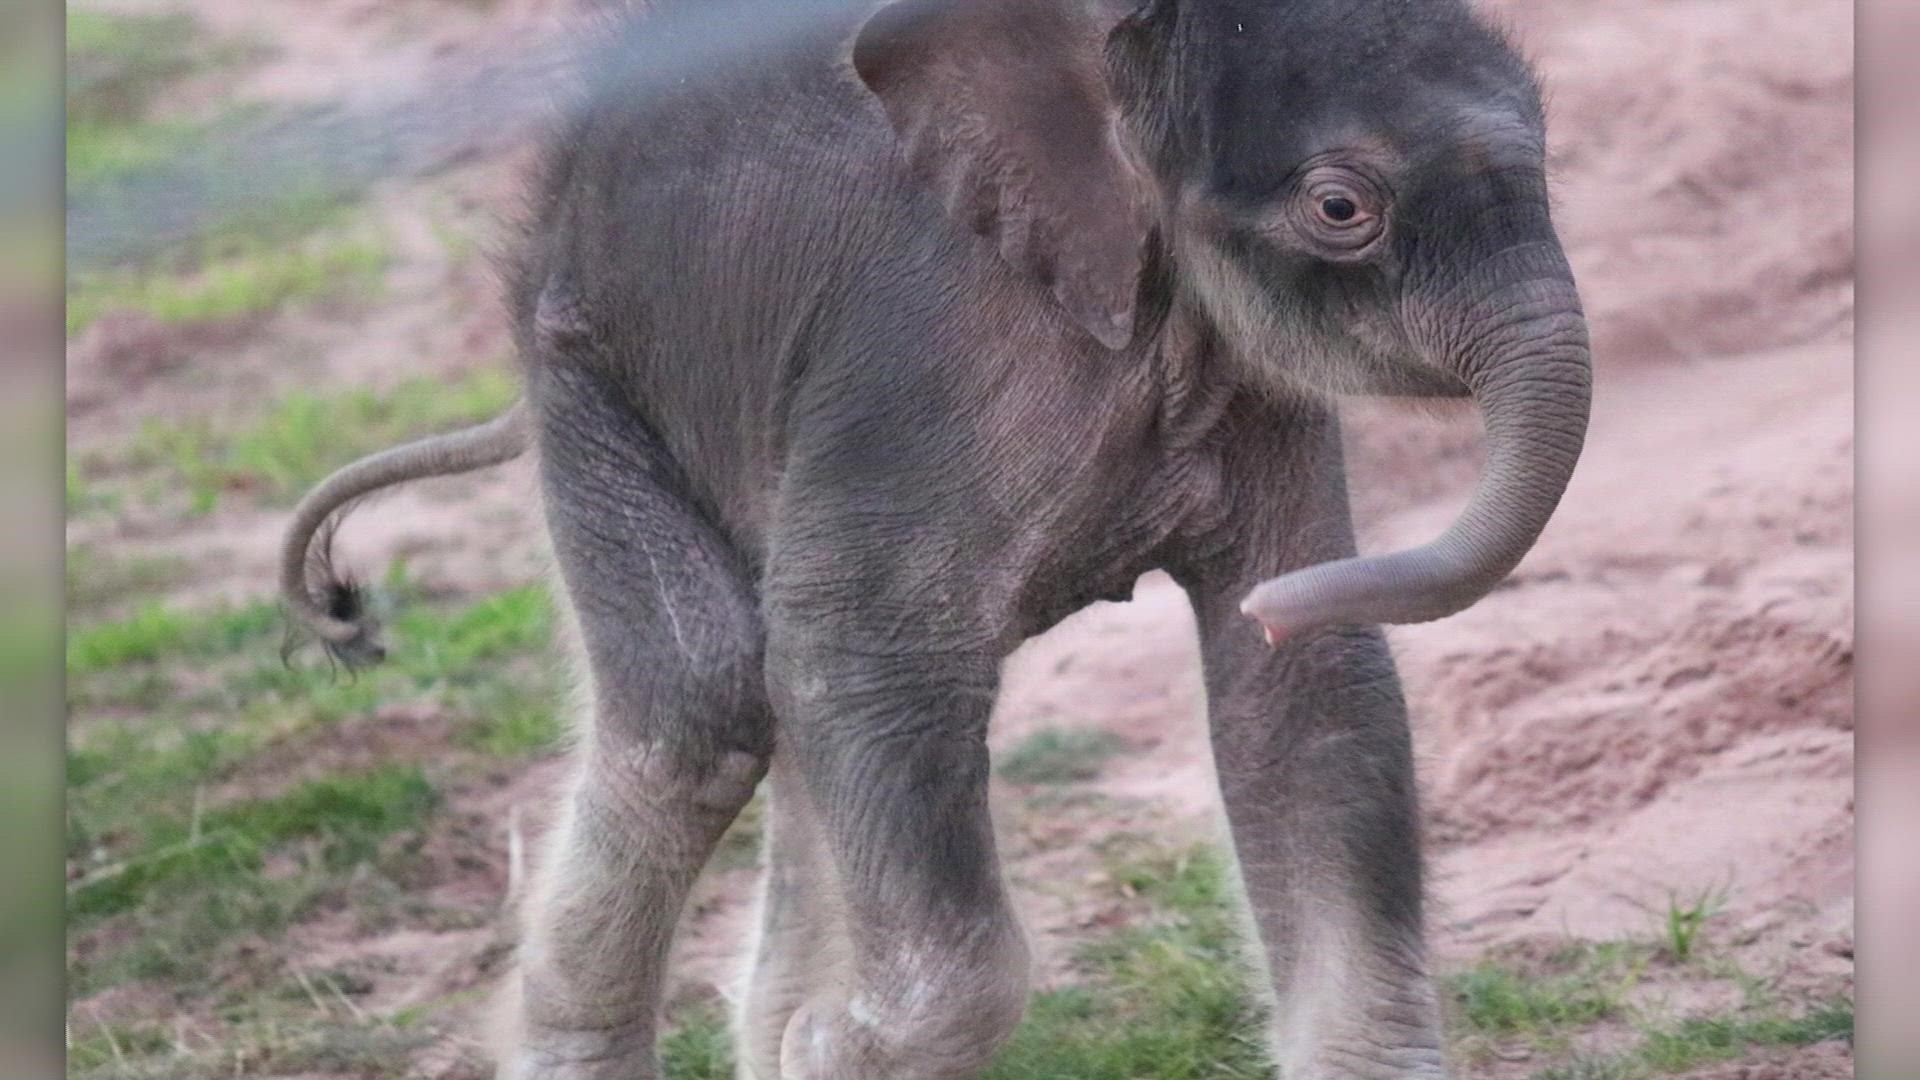 The zoo said elephant twins make up less than 1% of elephant births worldwide. Until these two, there haven't been any successful twin births in the U.S.